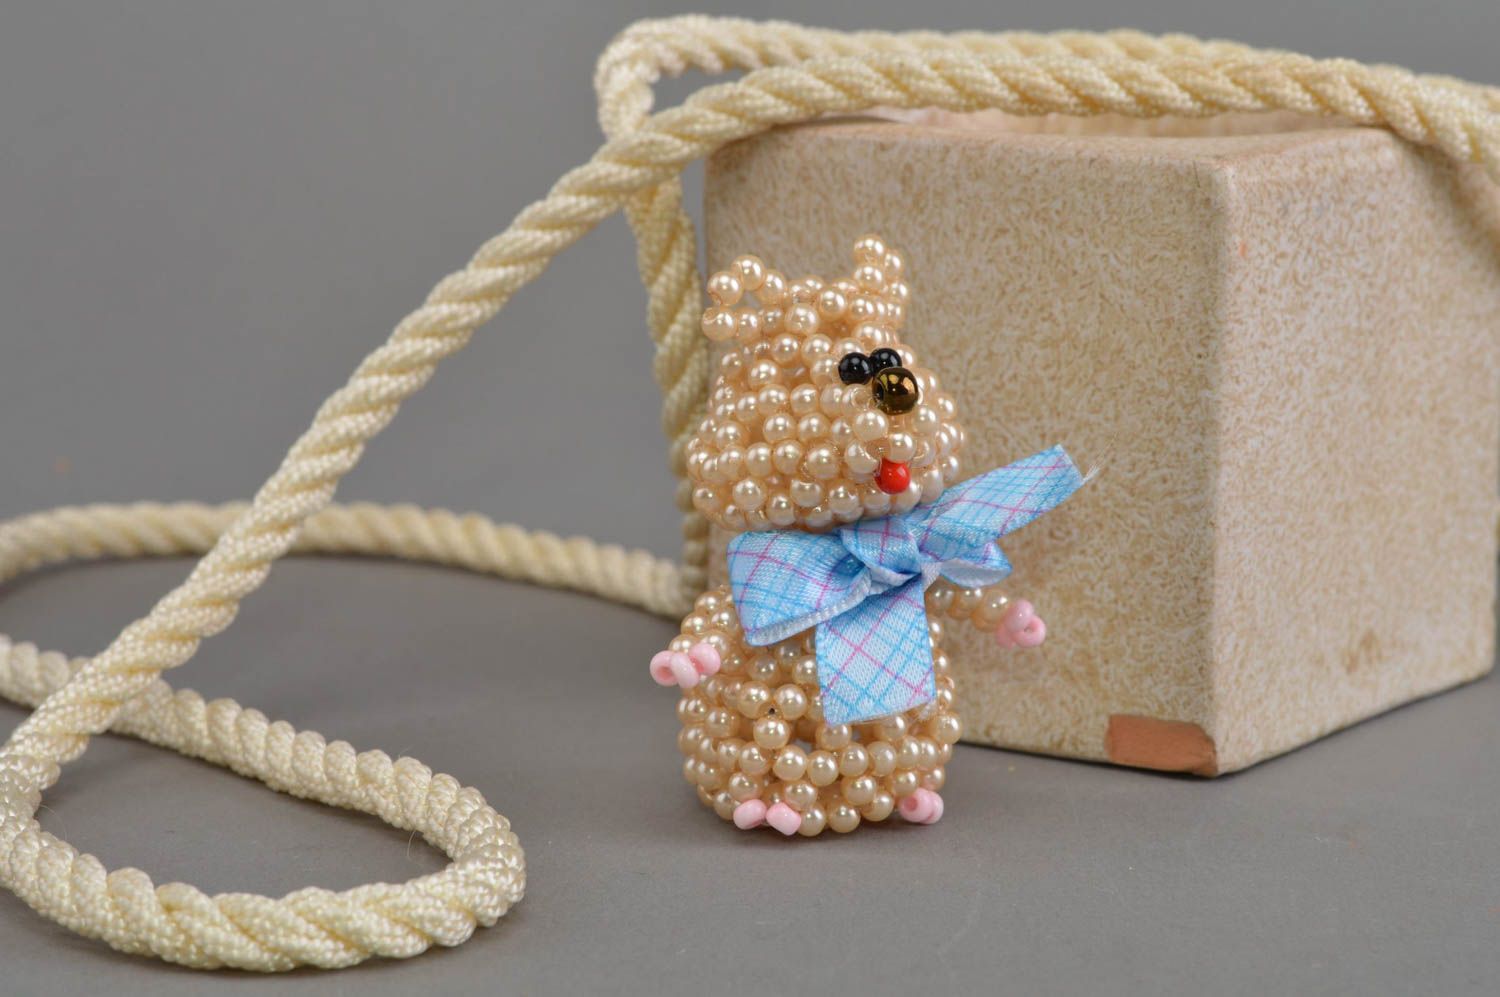 Small handmade collectible beaded statuette of cream colored bear for home decor photo 1